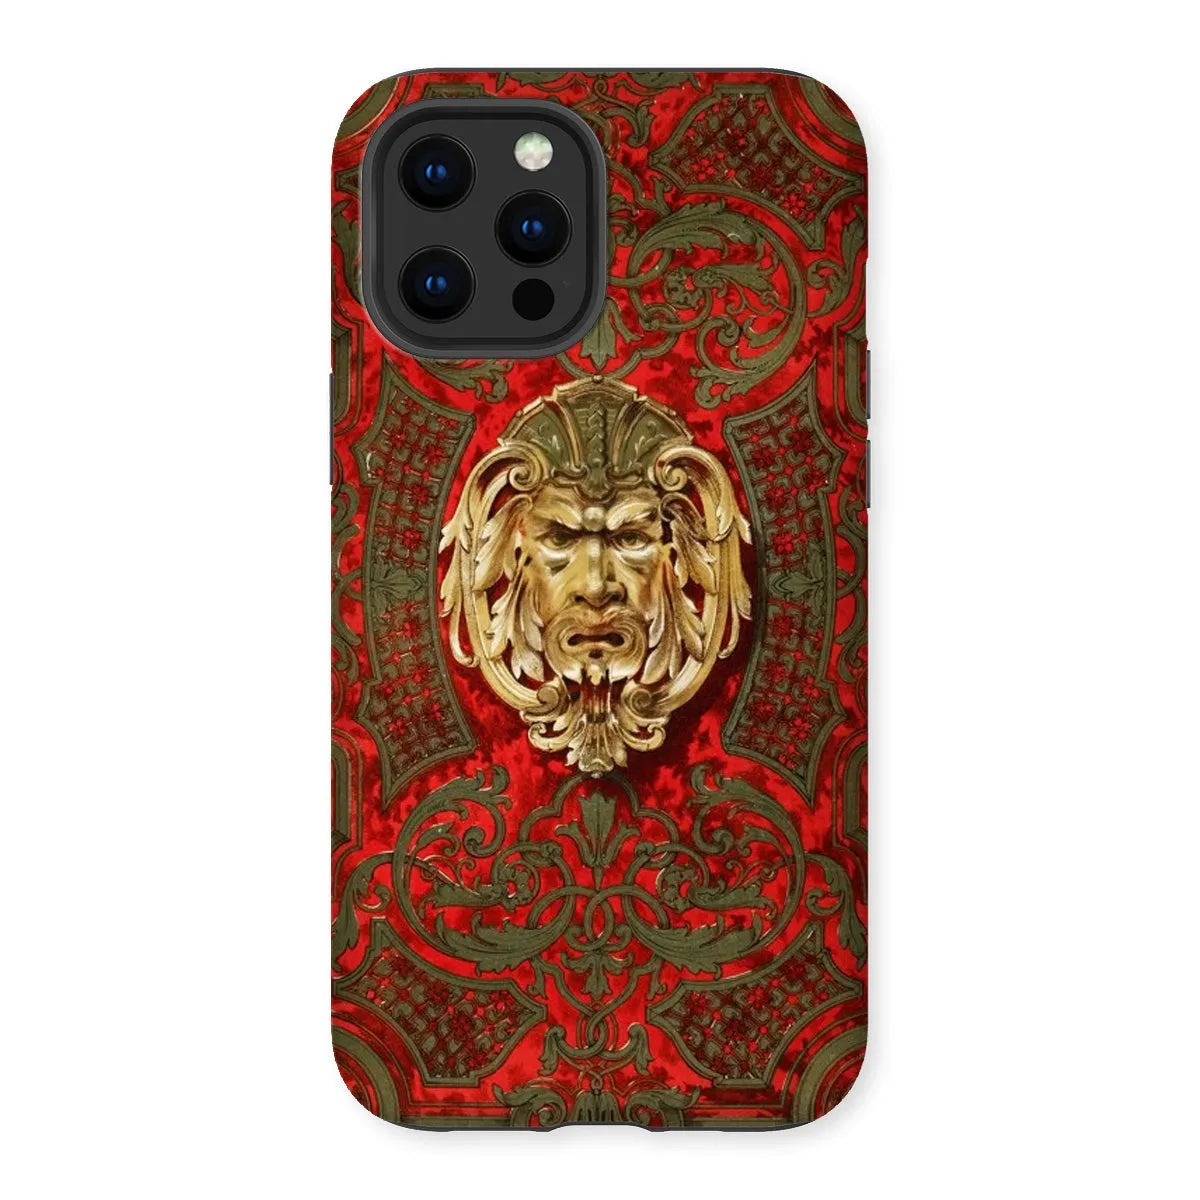 Panel In Buhl Victorian Art Phone Case - Matthew Digby Wyatt - Iphone 12 Pro Max / Matte - Mobile Phone Cases